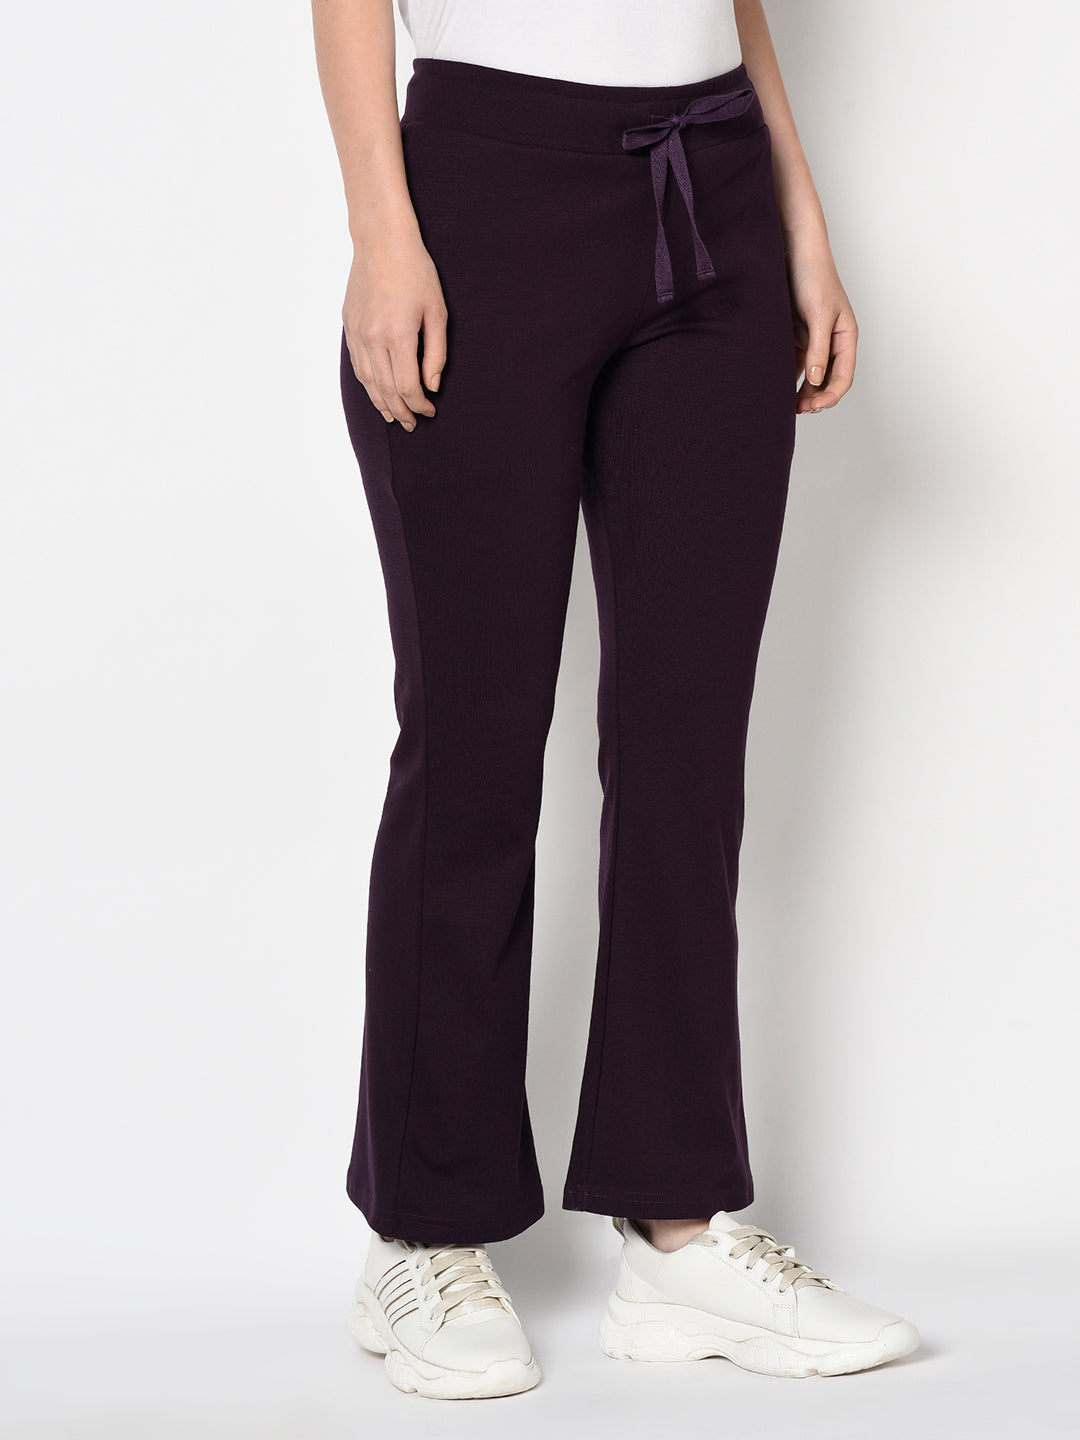 2094500 - Purple Bell Bottomed Stretch Fabric Track Pant With Zipper Pockets